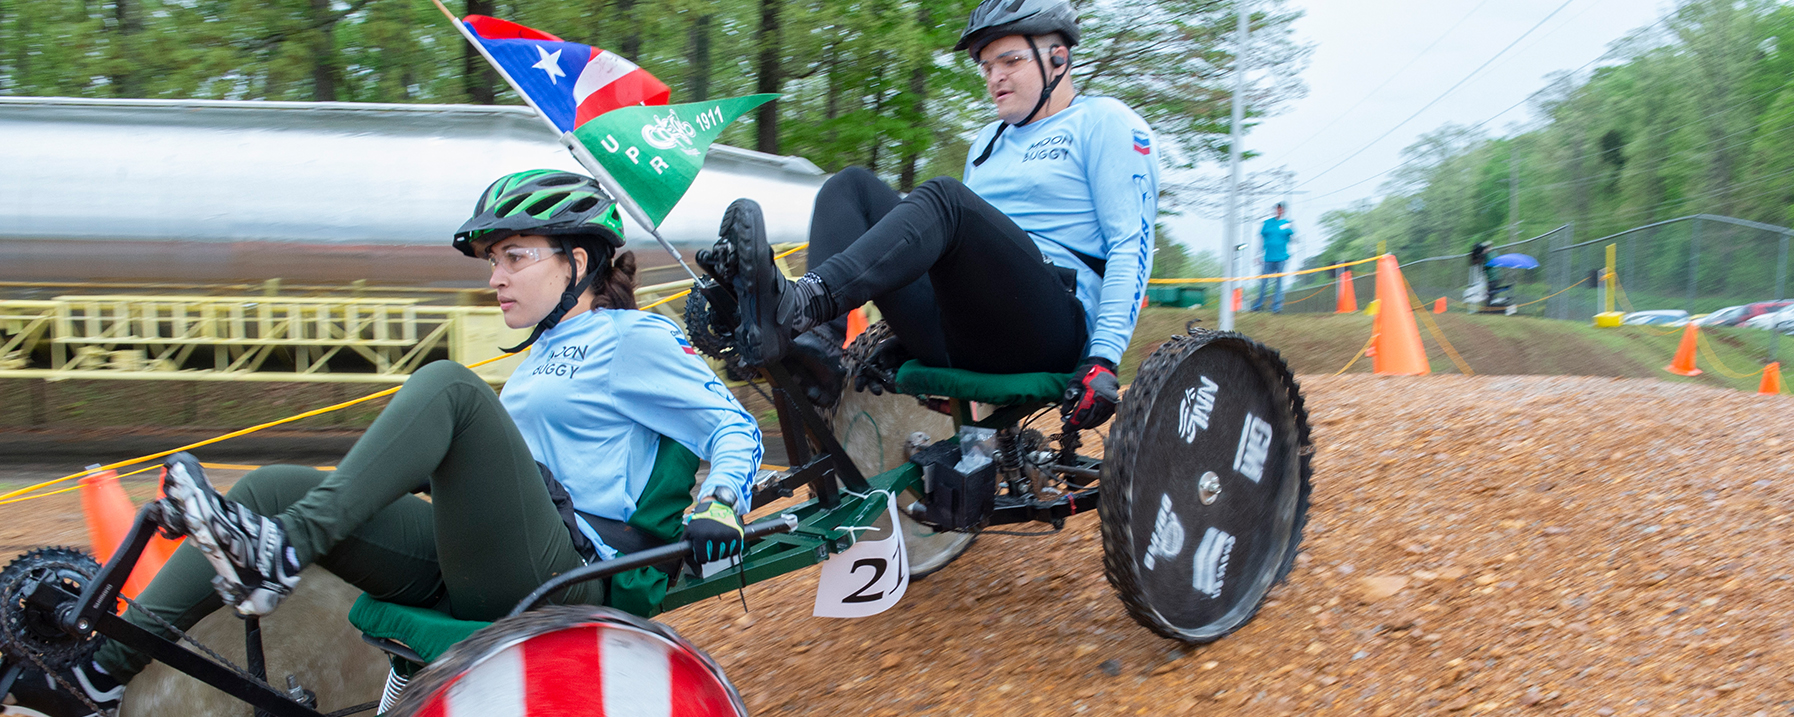 Human Exploration Rover Challenge Team On Course